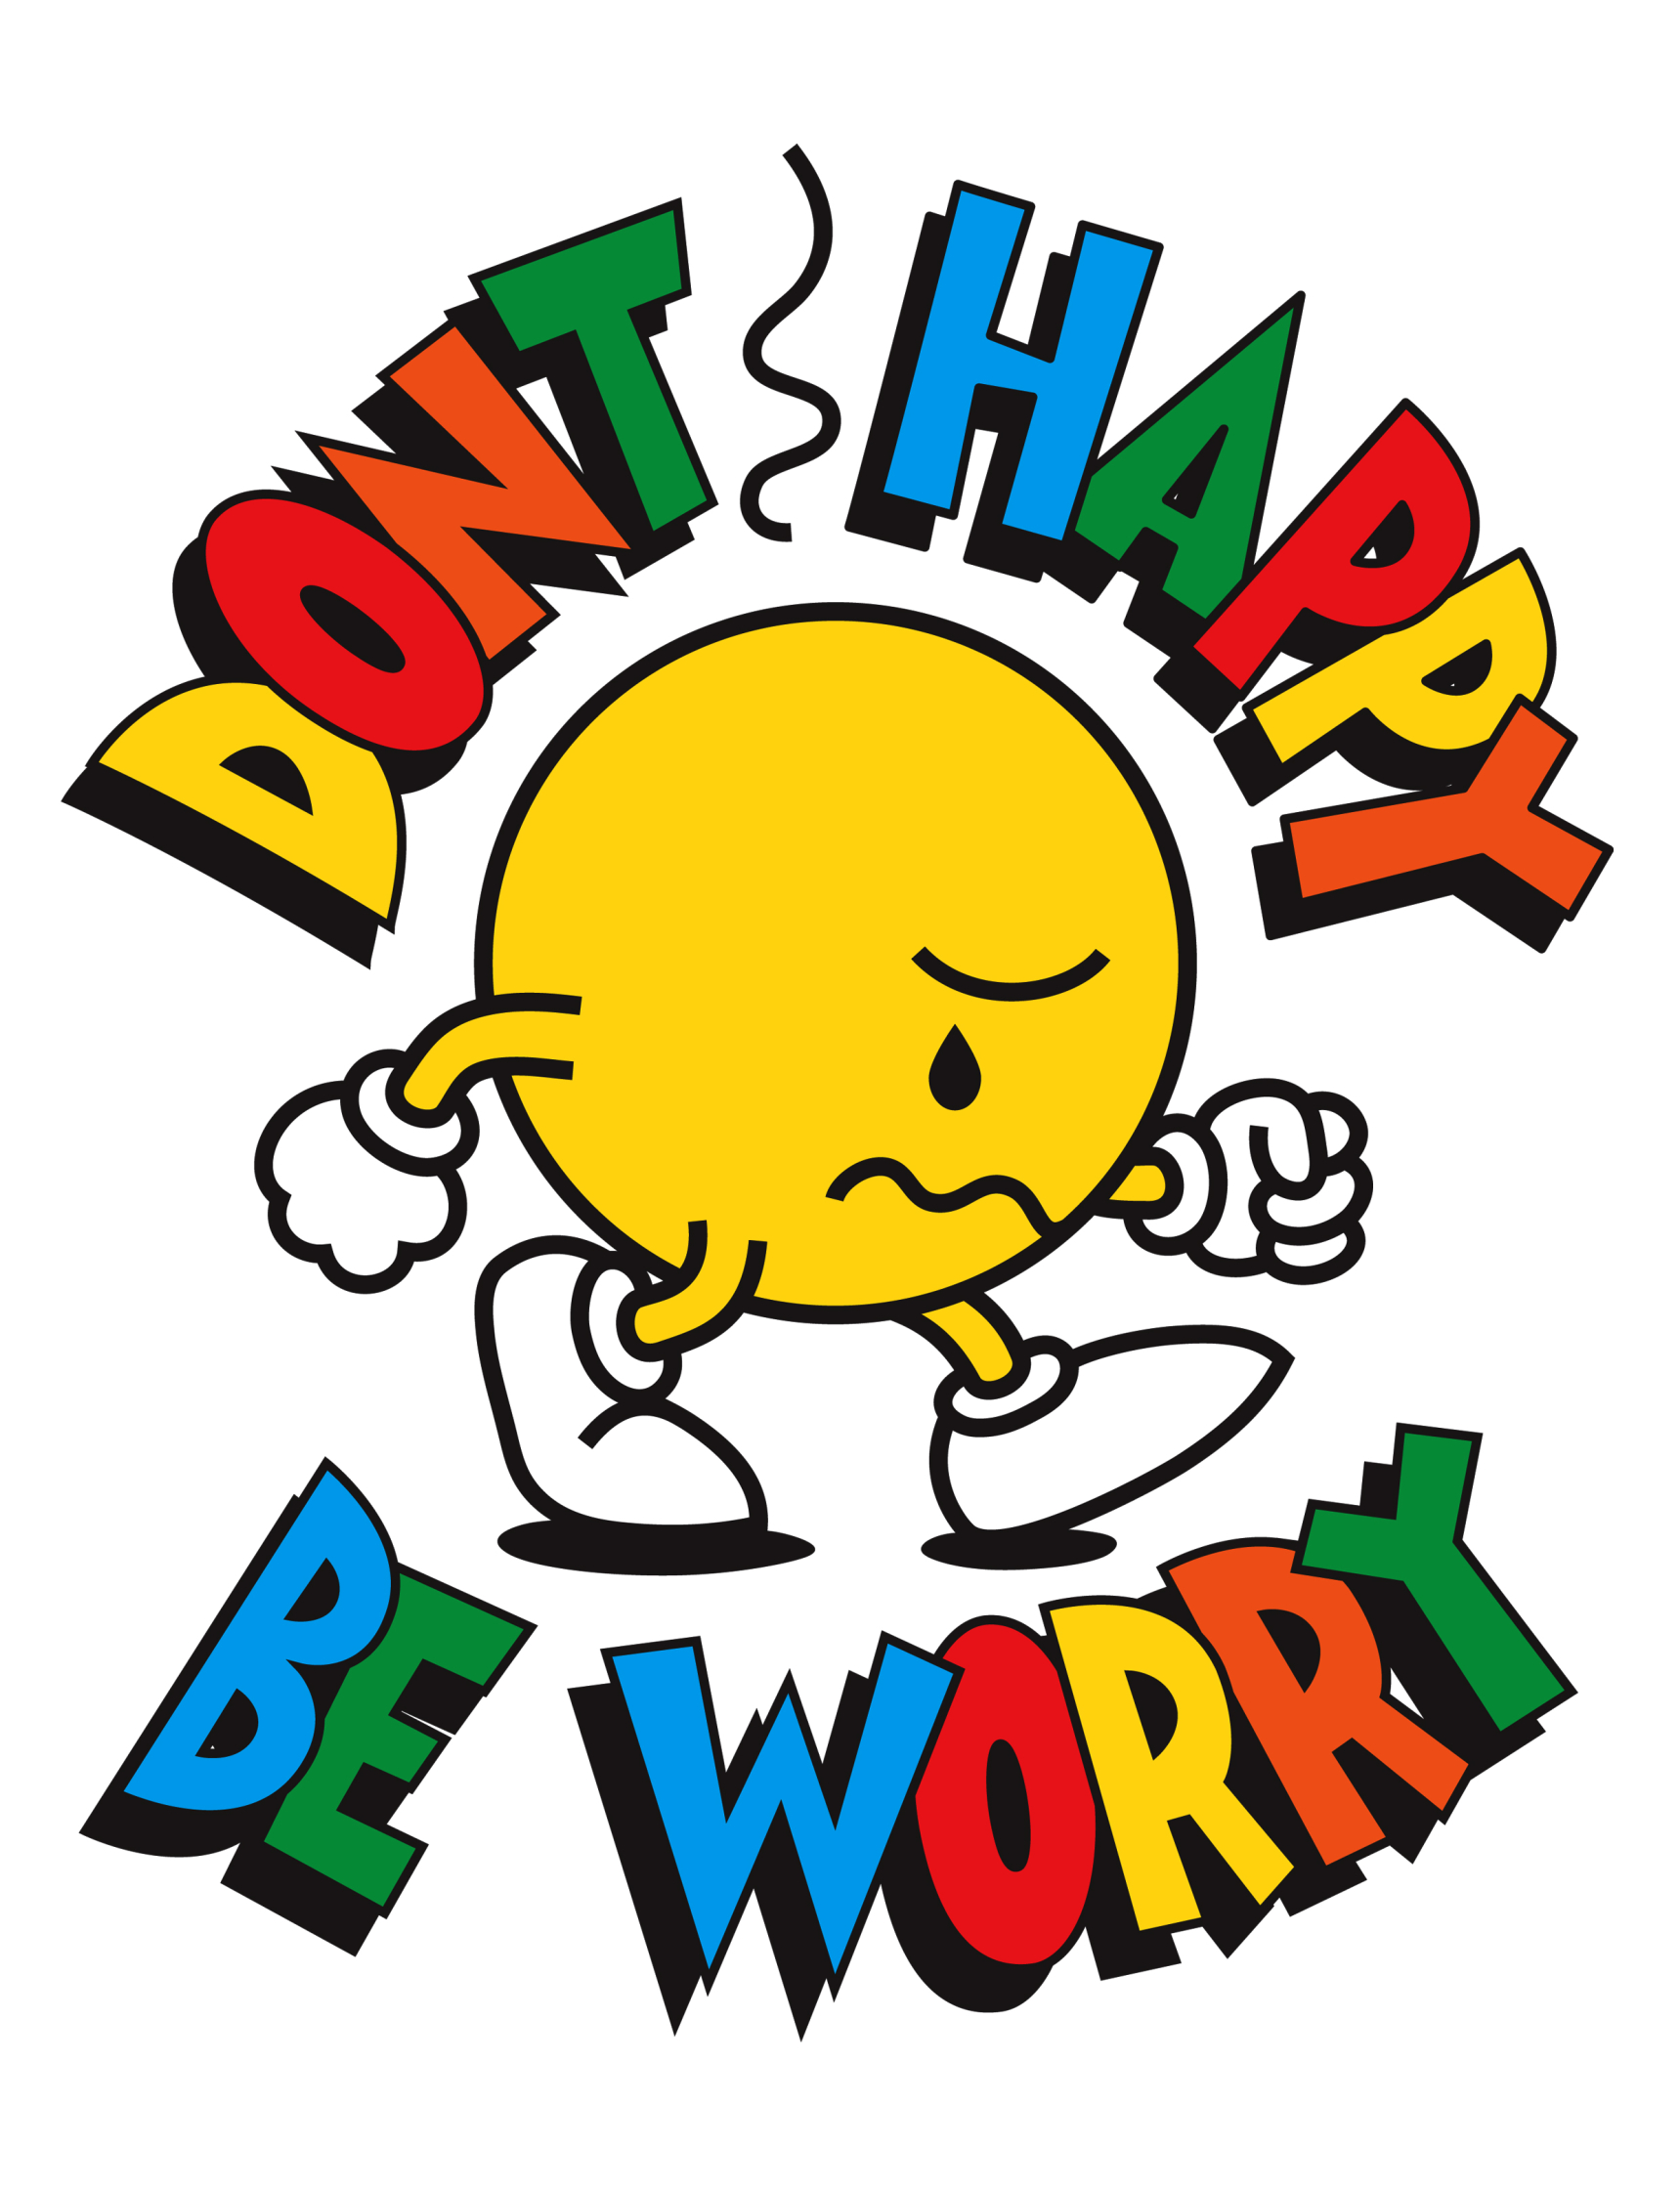 Don't Happy Be Worry